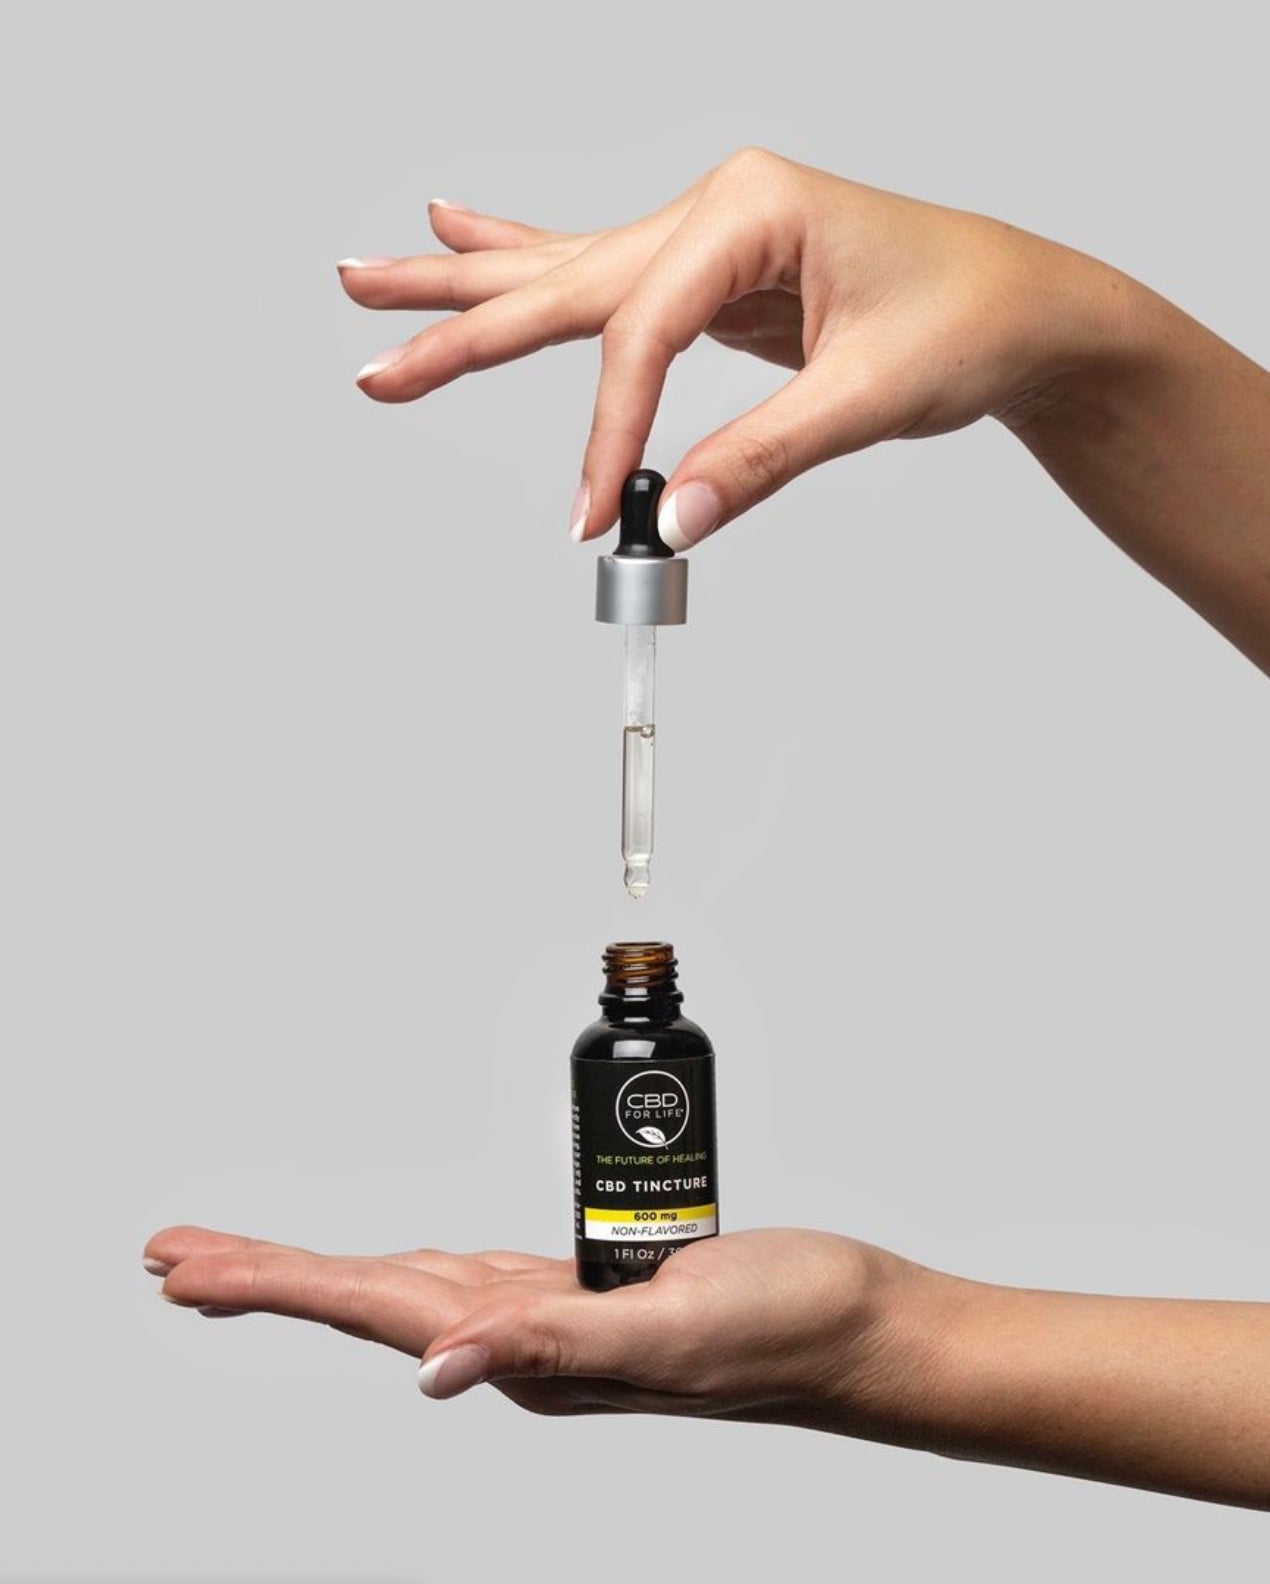 Incorporate 600 mg CBD oil non flavored into your daily routine and you will feel the difference. As always, consistency is key when using CBD oil or any other form of CBD. If you’re feeling out of control—stress, worry, anxiety— take control with the help of CBD oil 600mg.